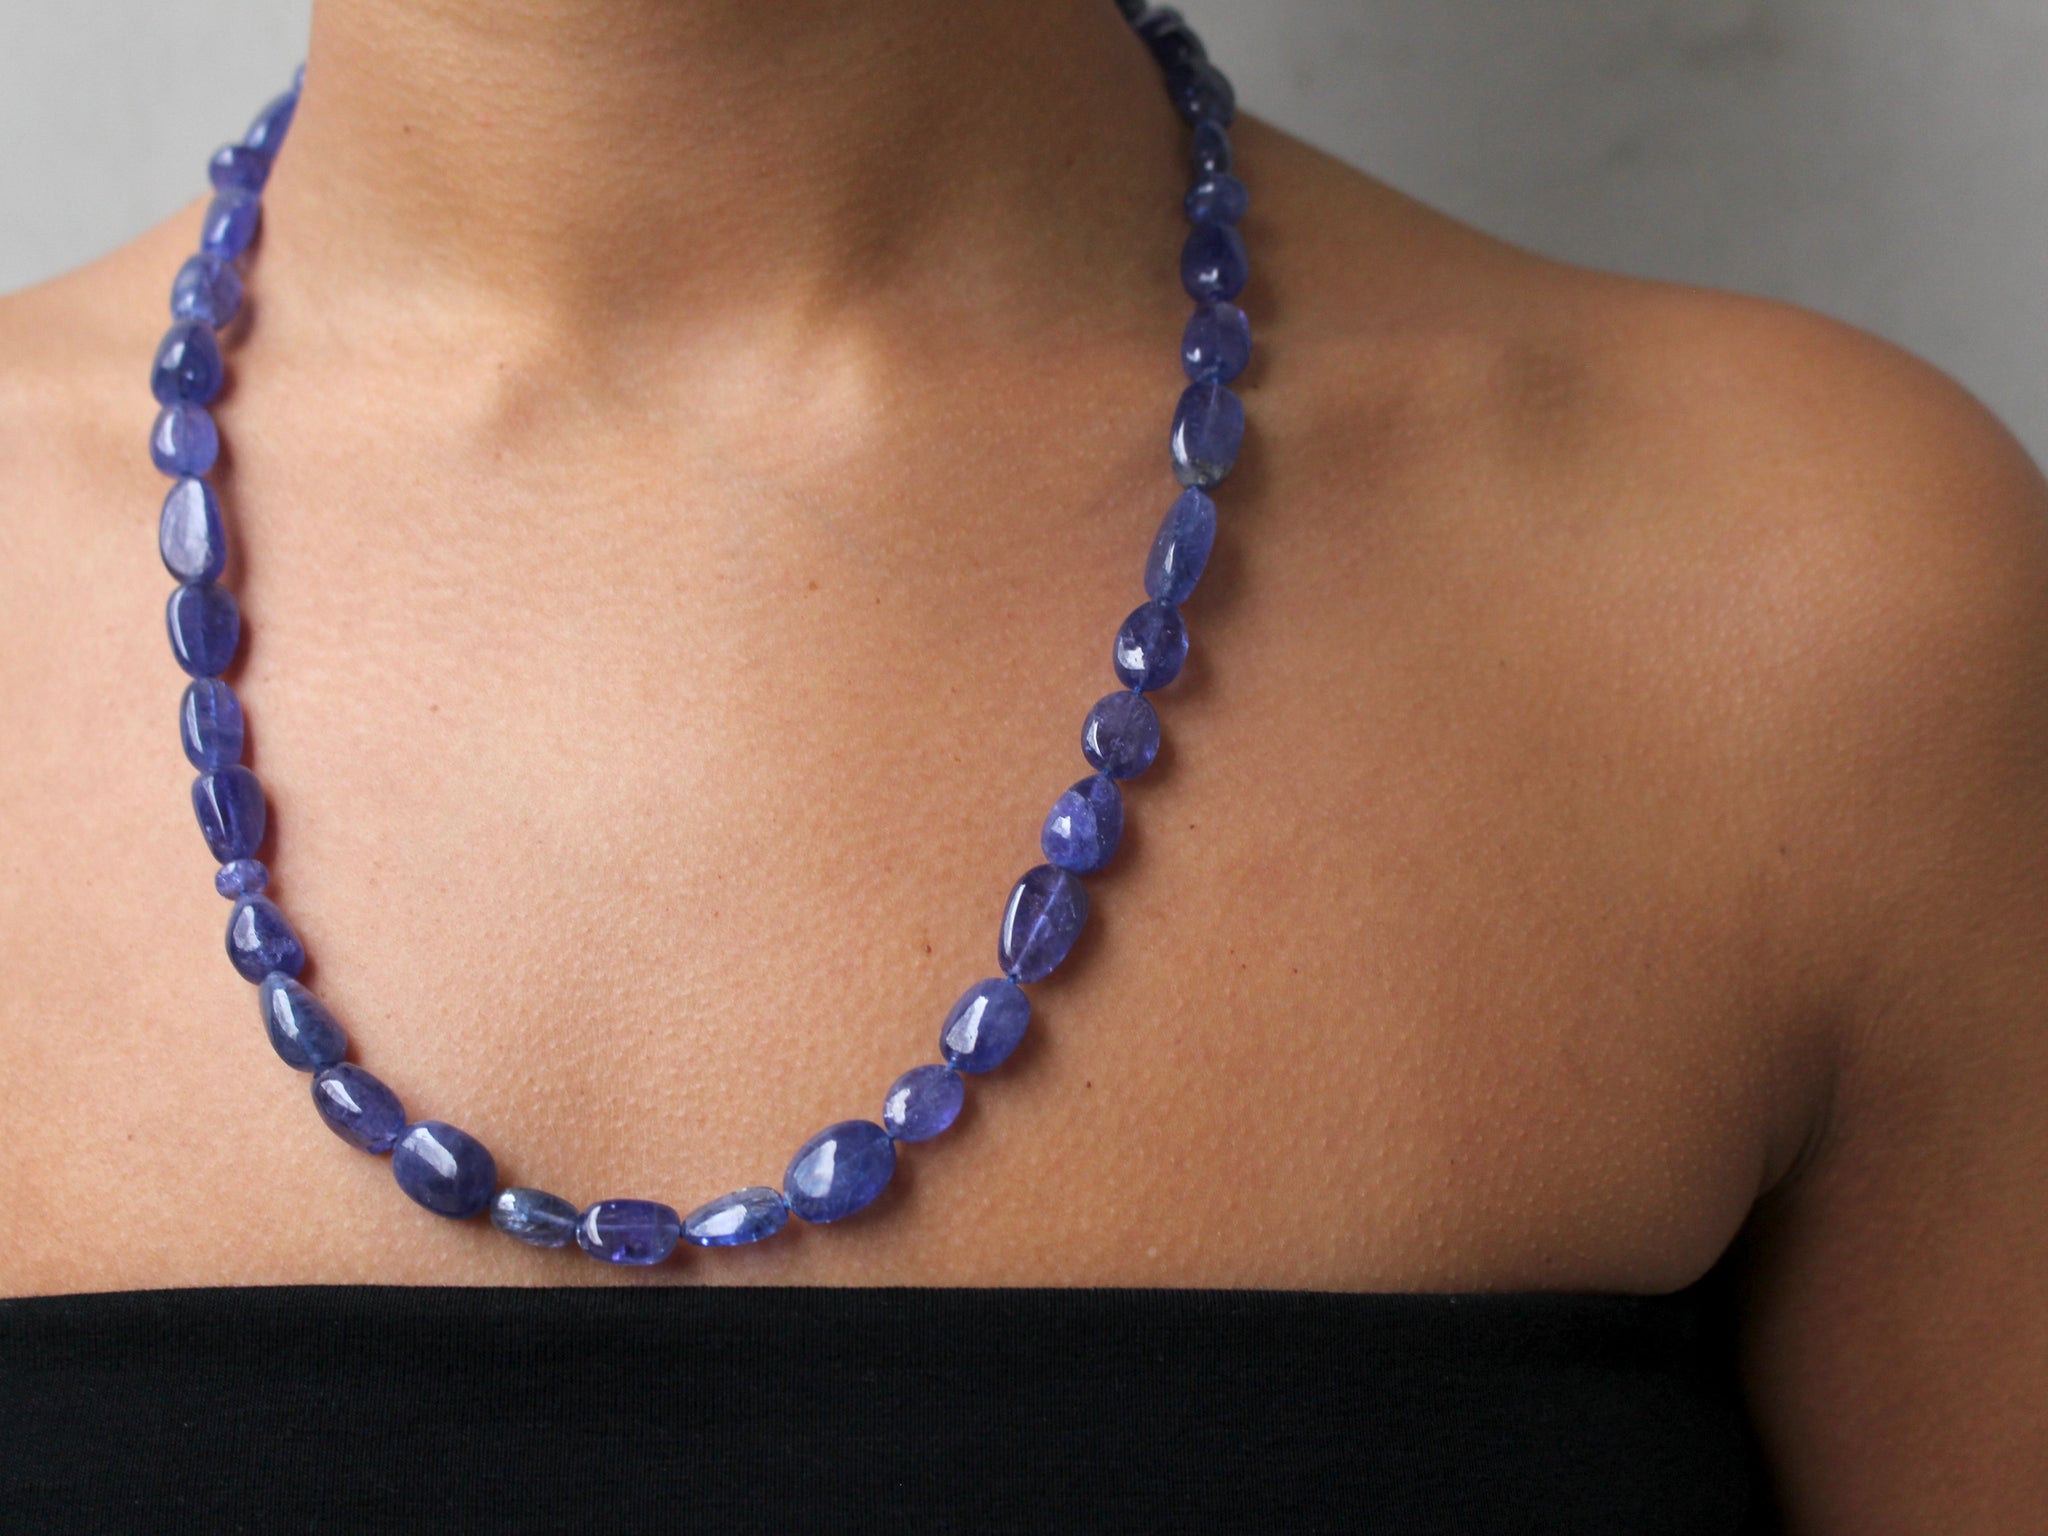 Necklace of 43 cabuchon Tanzanite beads with an 18 krt red gold lock